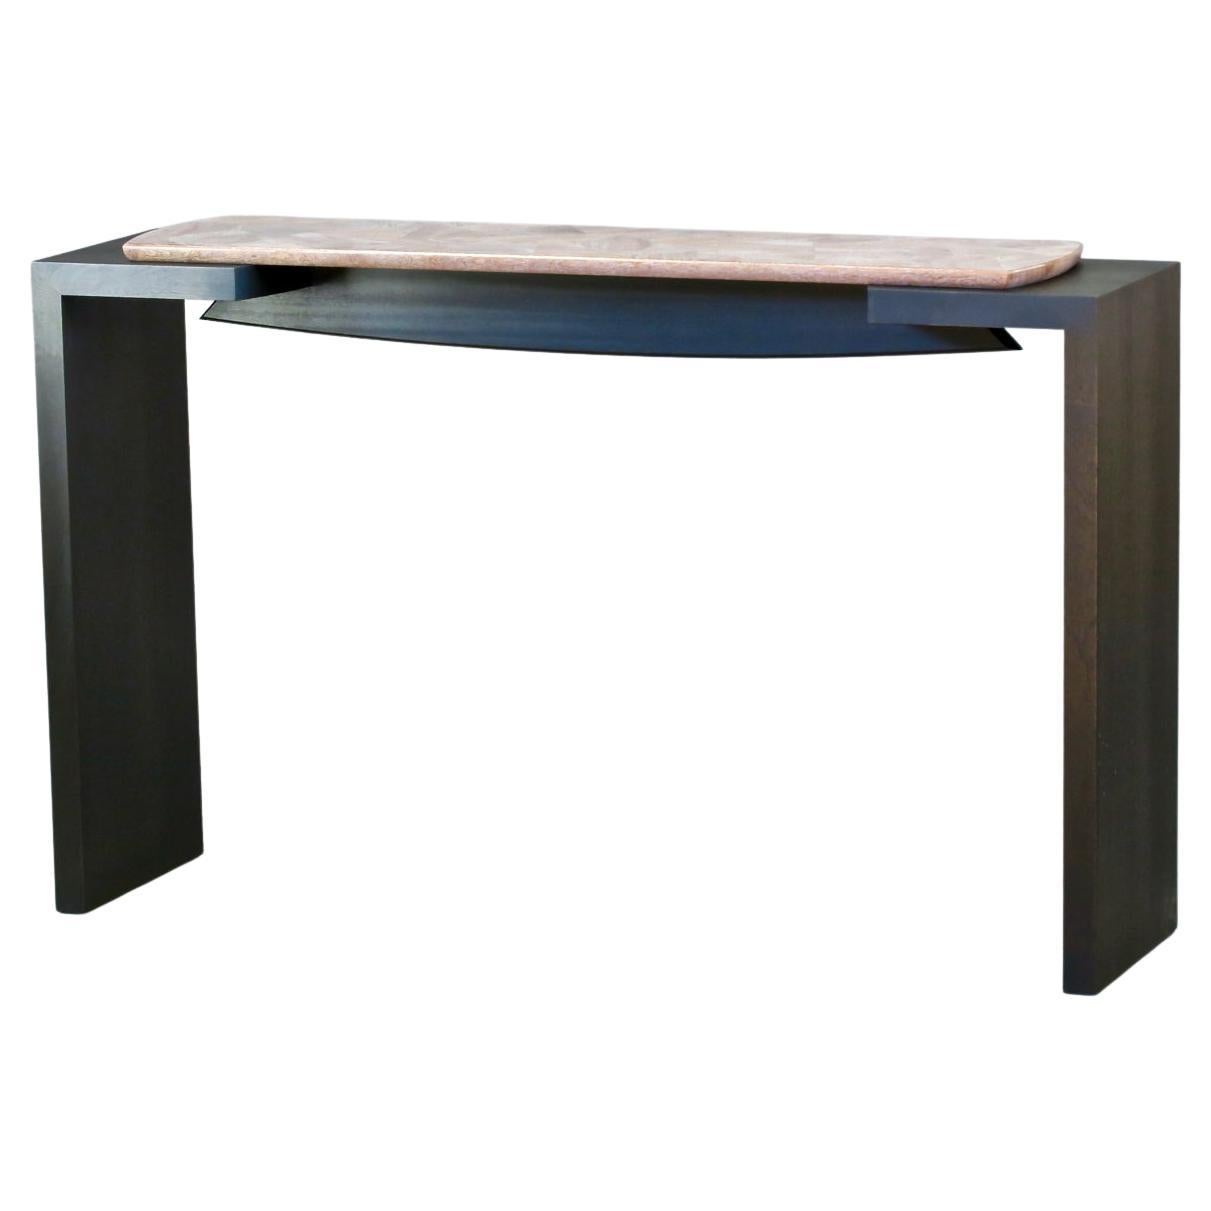 Cracked Ice Mahogany Console Table by Thomas Throop/ Black Creek Design-In Stock For Sale